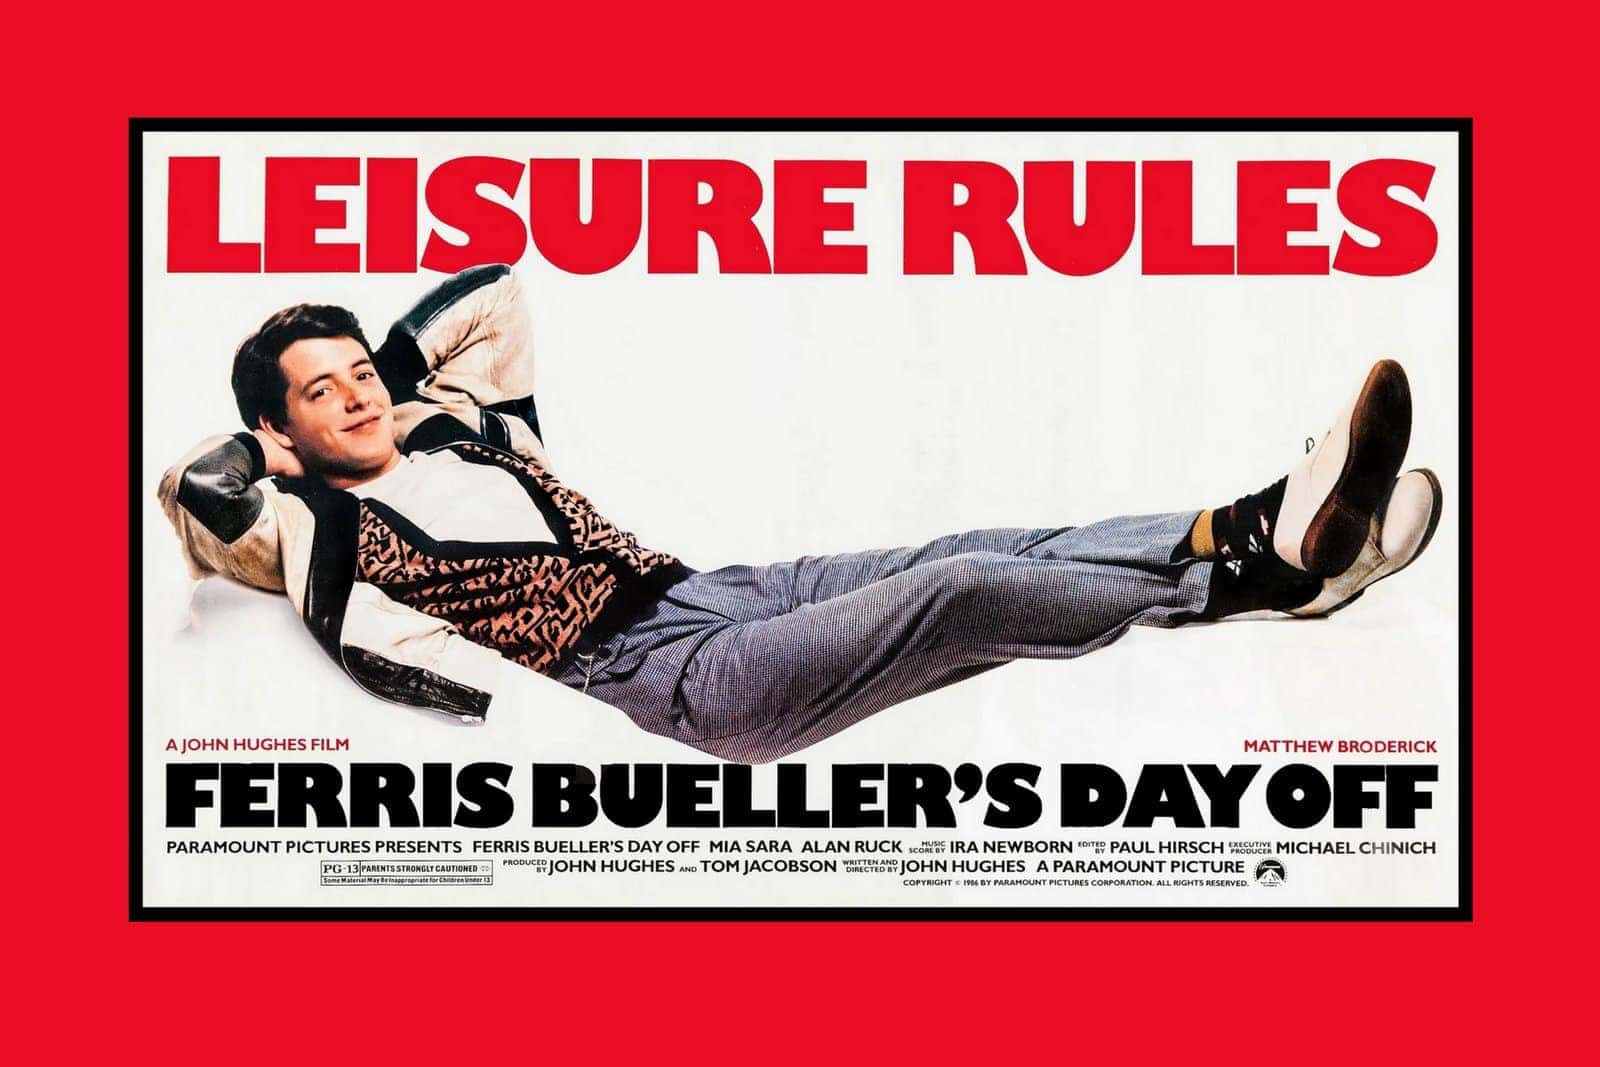 36-facts-about-the-movie-ferris-buellers-day-off